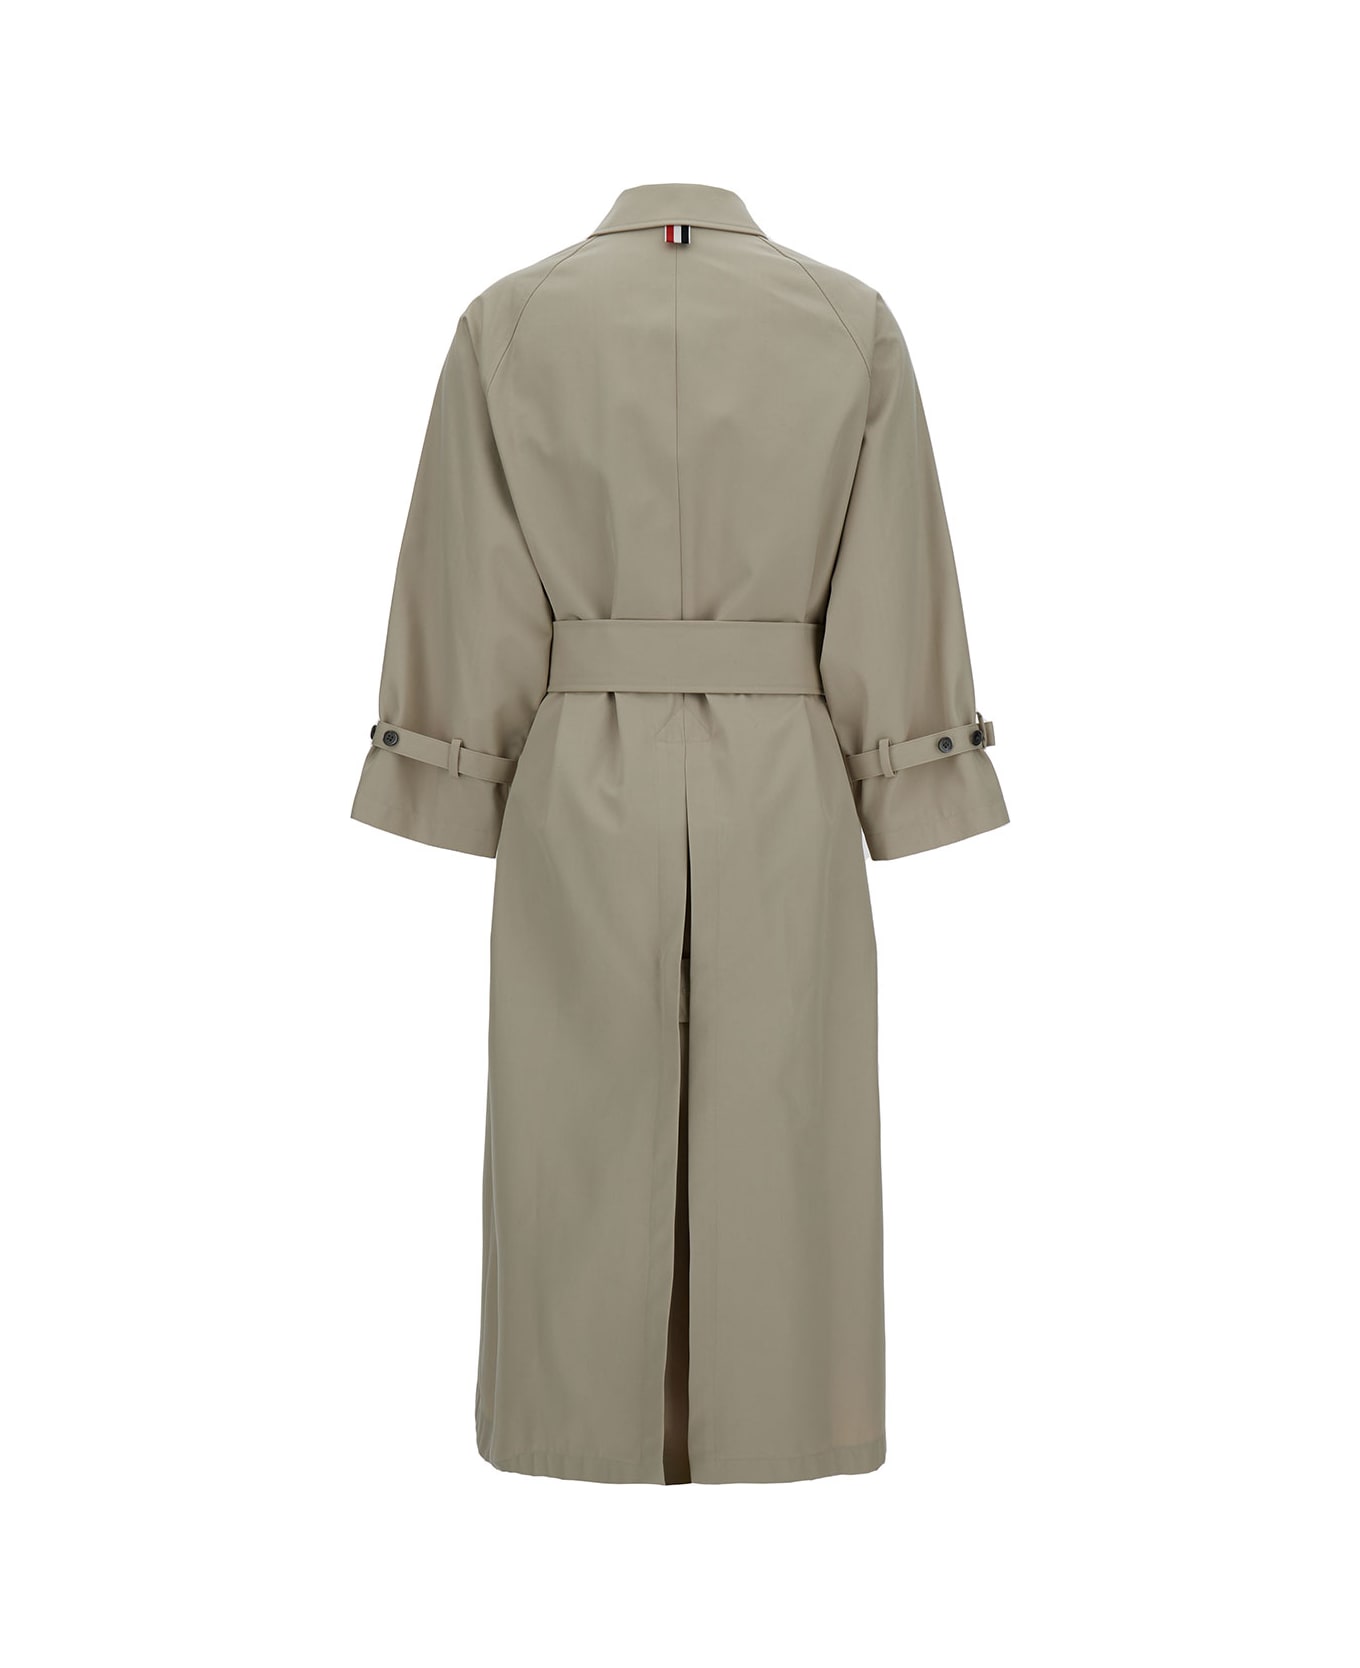 Thom Browne Beige Trench Coat With Matching Belt In Waterproof Cotton Woman - Beige